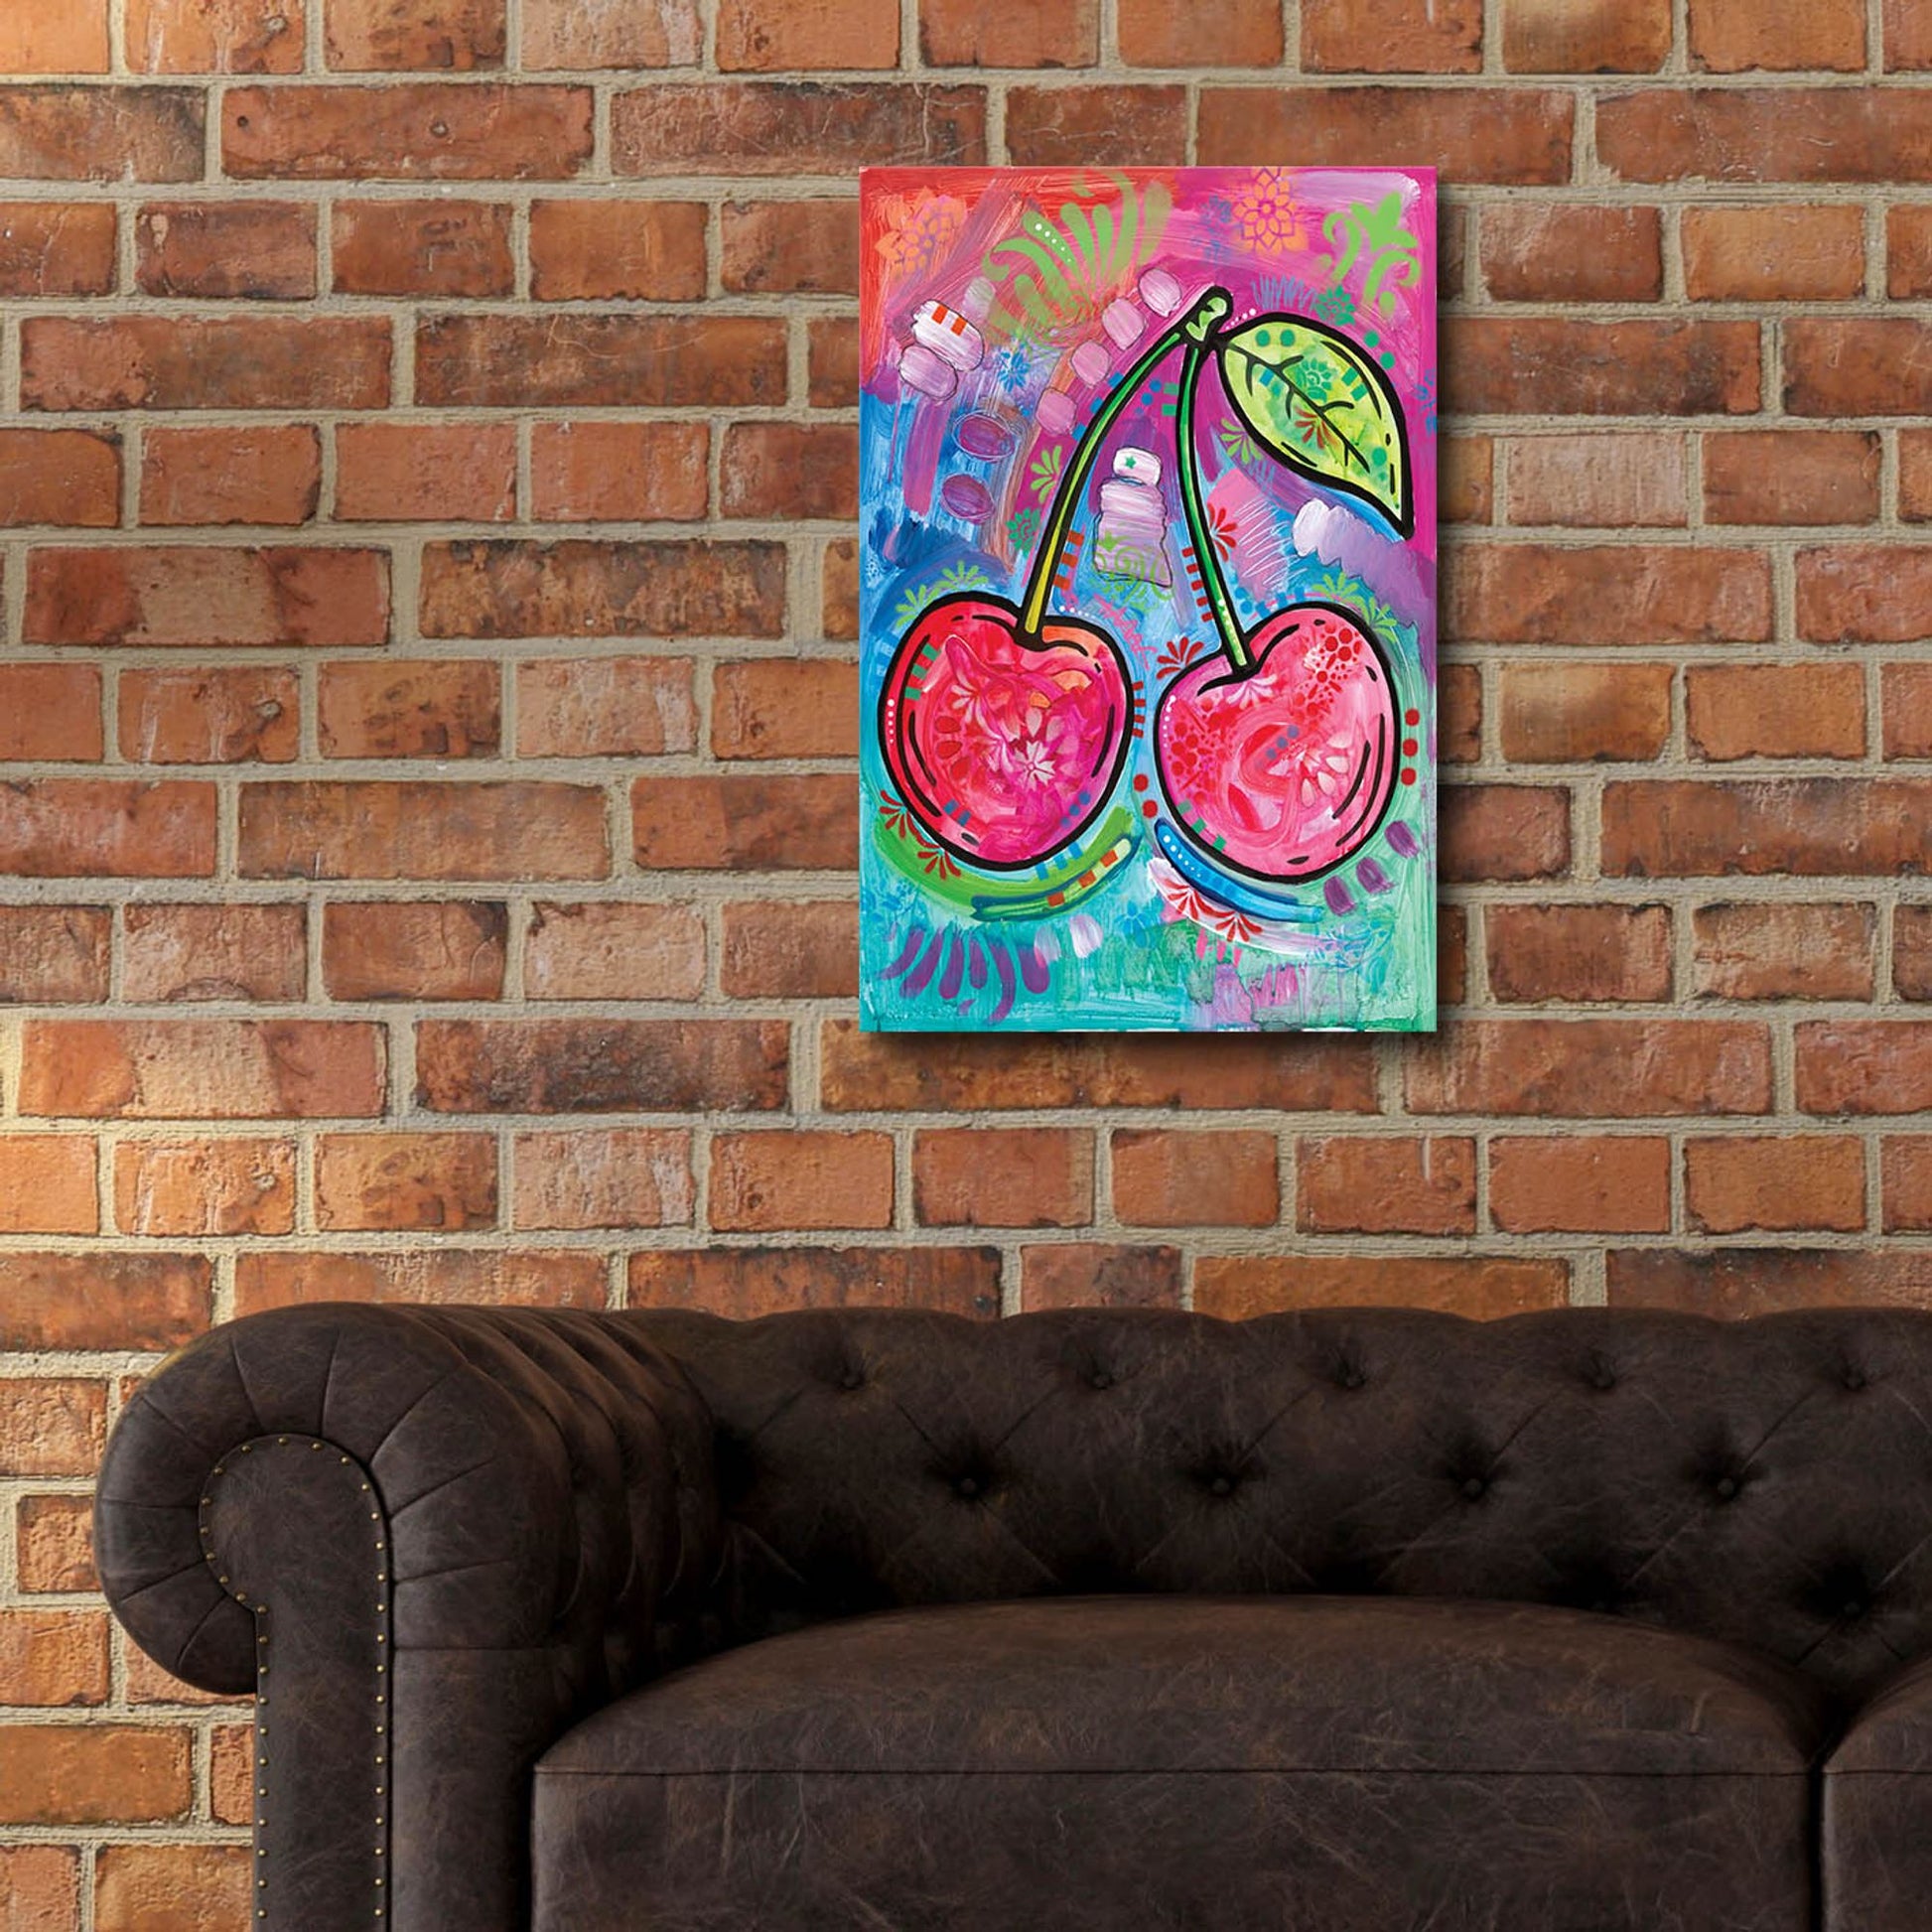 Epic Art 'Cherry Time' by Dean Russo, Acrylic Glass Wall Art,16x24